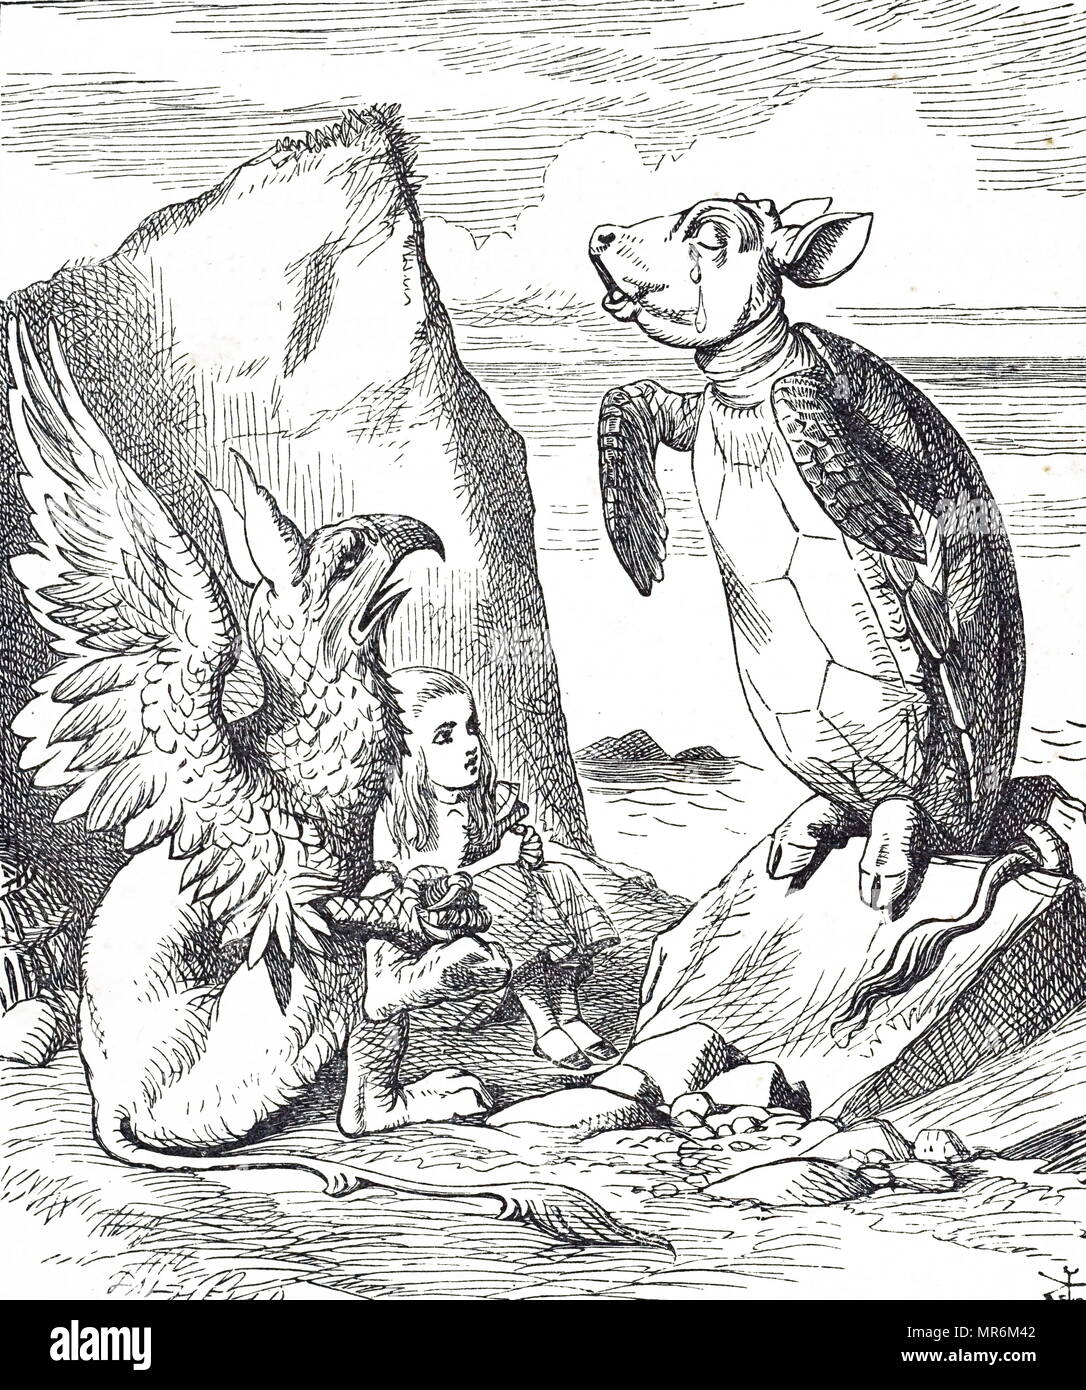 Illustration depicting Alice, Mock Turtle and the Gryphon from Alice's Adventures in Wonderland. Illustrated by John Tenniel (1820-1914) an English illustrator, graphic humourist, and political cartoonist. Dated 19th century Stock Photo